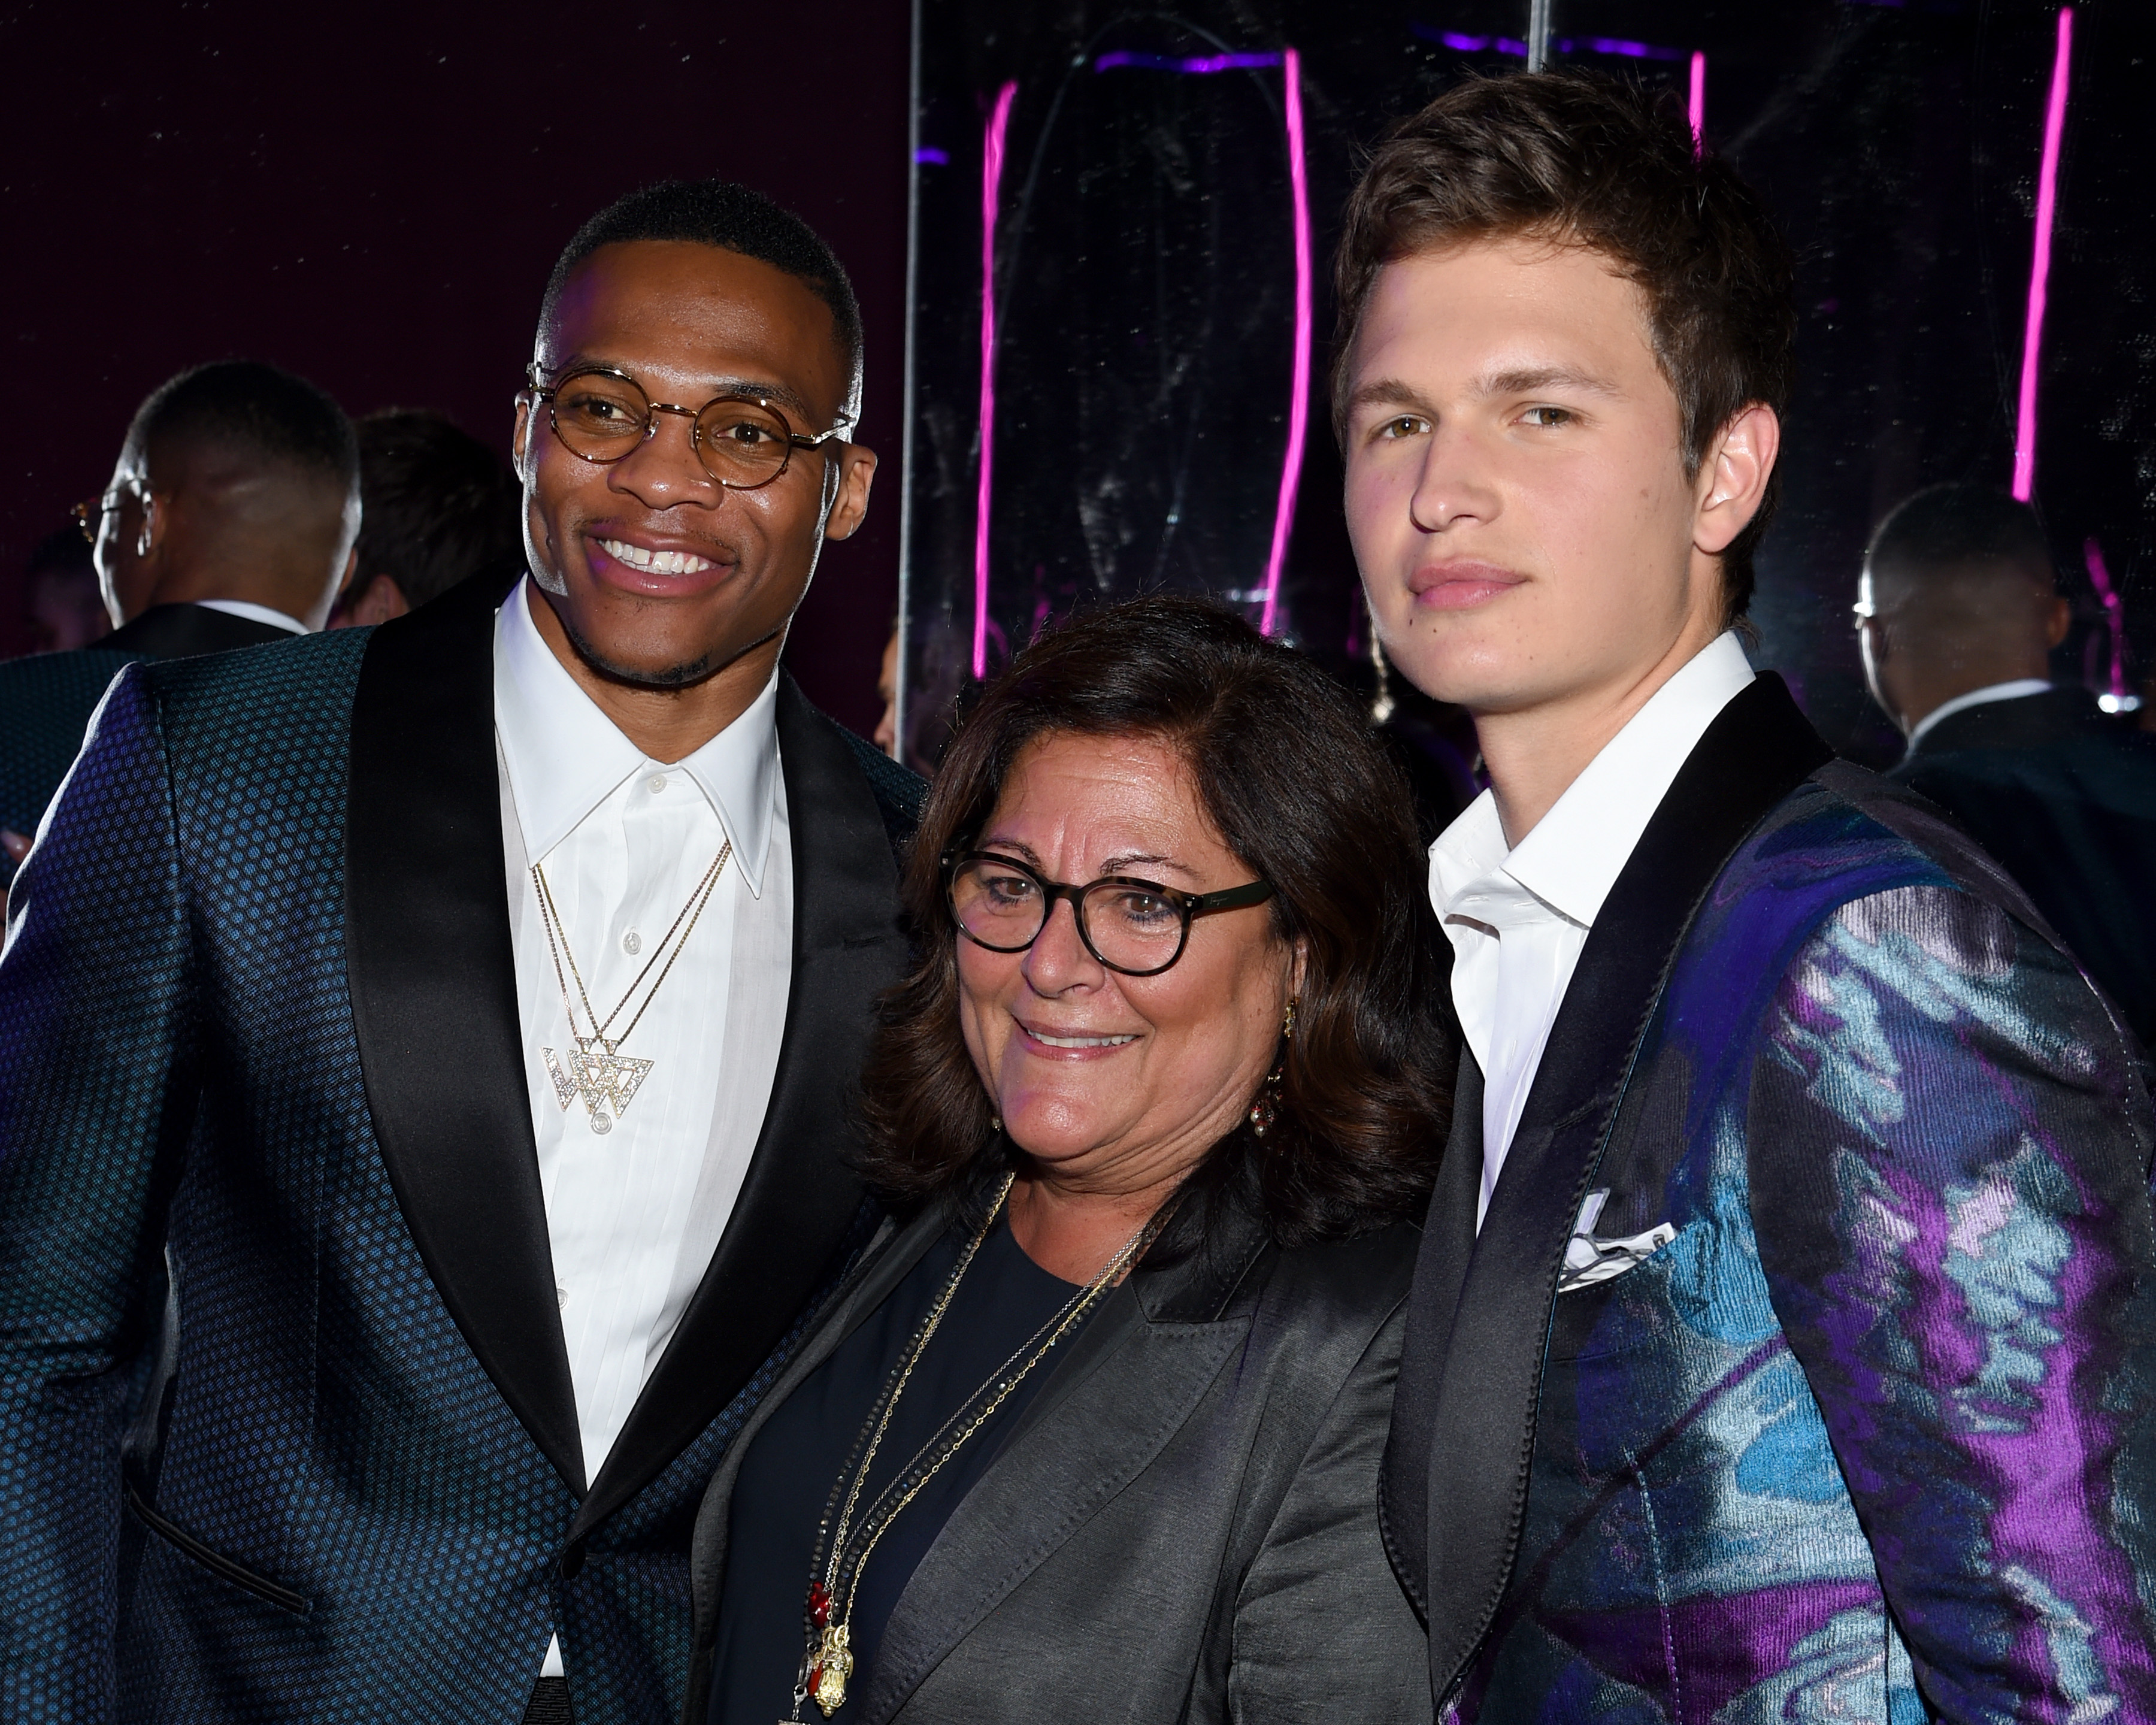 Russell Westbrook dubs himself #fashionking at New York Fashion